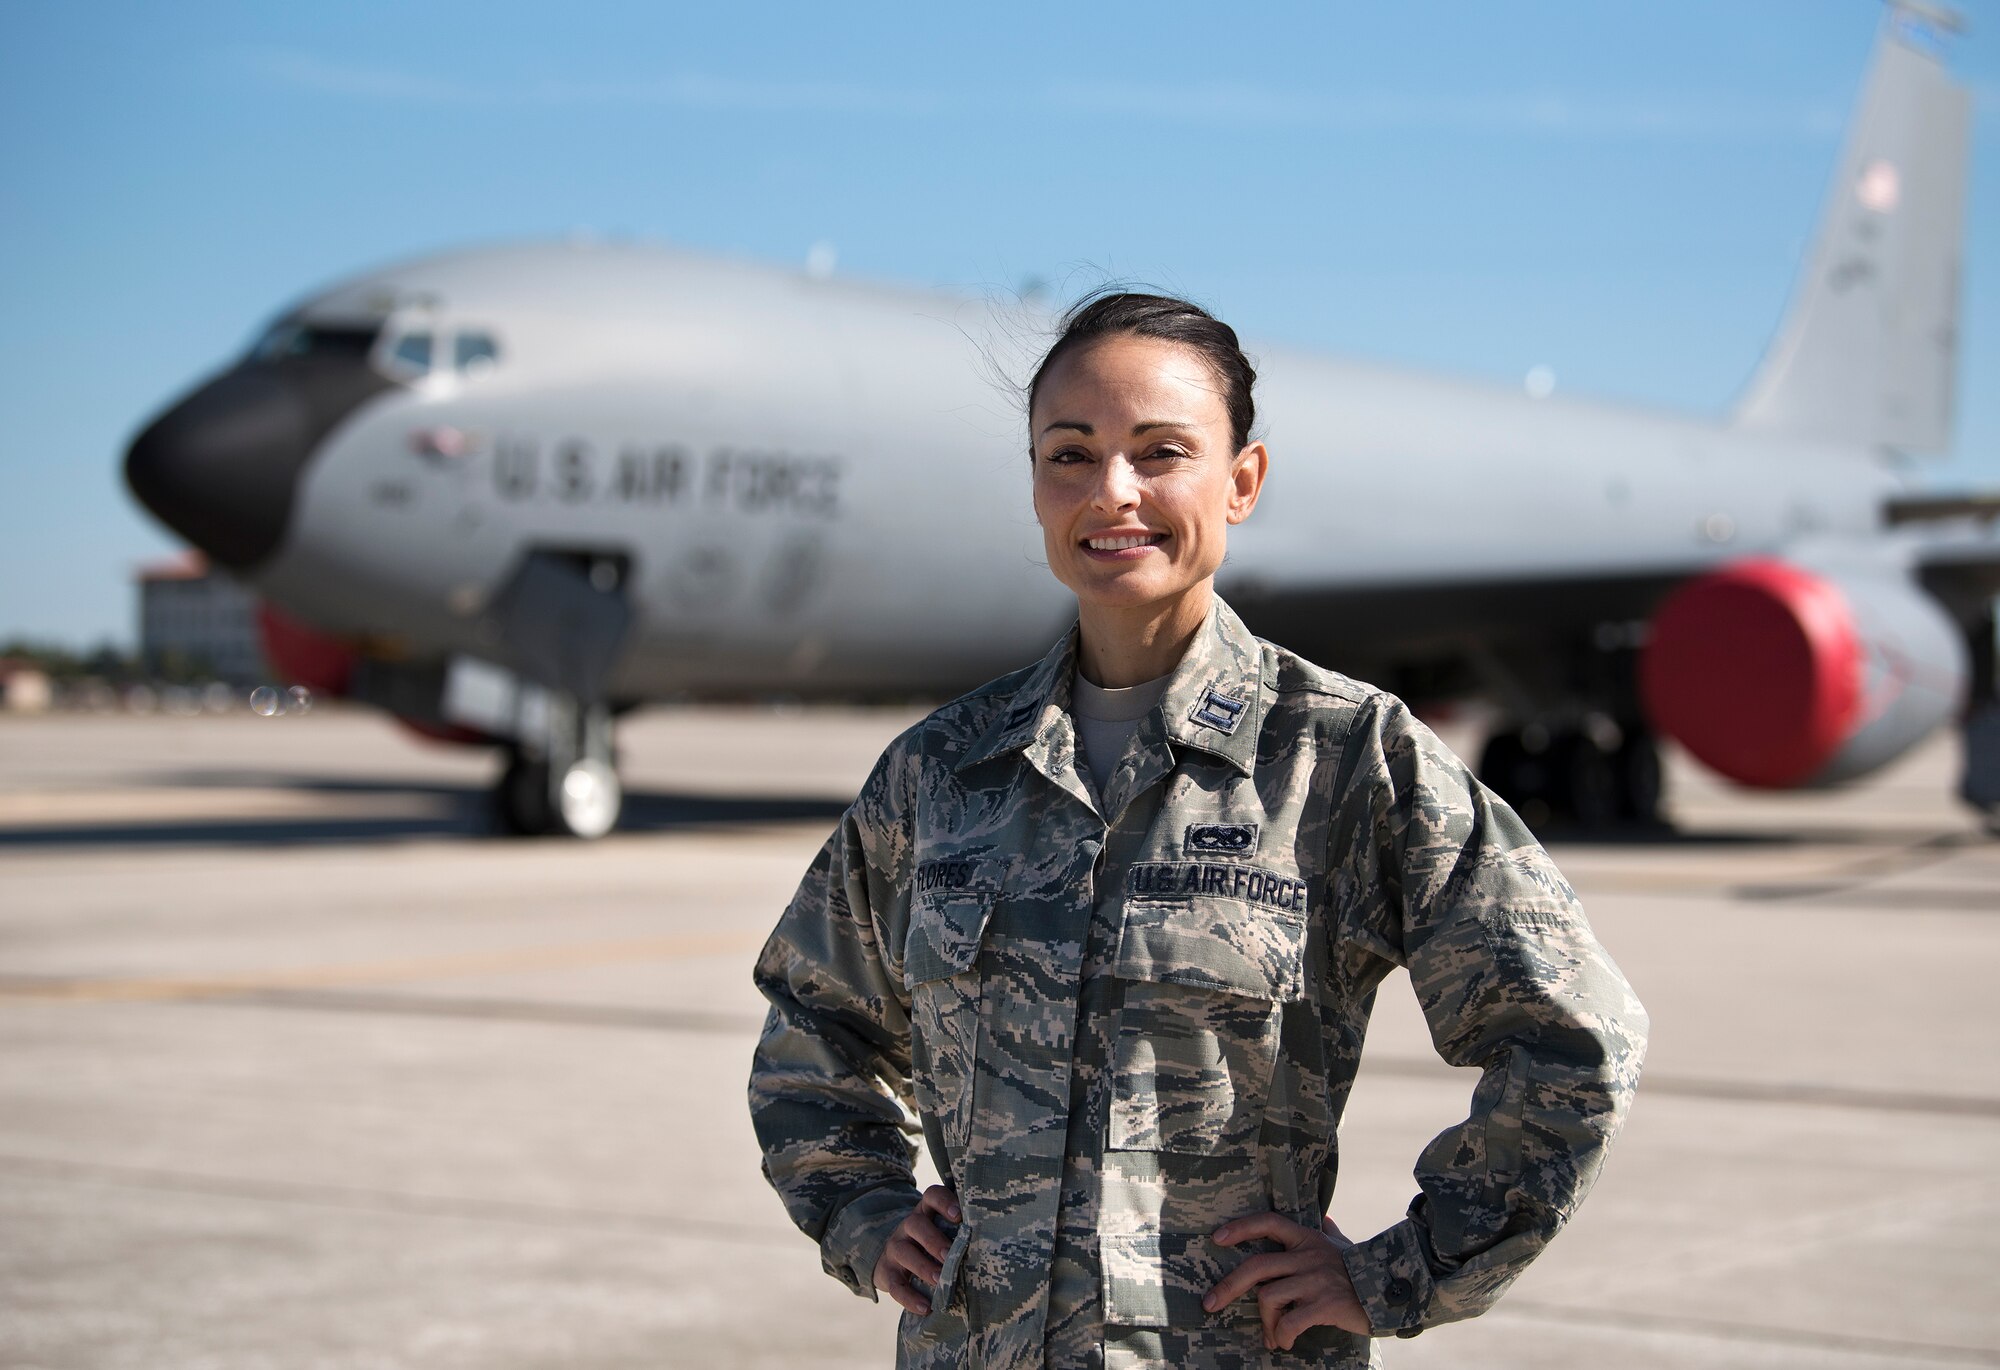 U.S. Air Force Capt. Kierstin Flores, an executive officer with the 6th Maintenance Group, pauses for a photo at MacDill Air Force Base, Fla., April 5, 2018. Flores began her career in the Air Force in 1997 as a pharmacy technician and commissioned as a maintenance officer 15 years later. While in the Air Force, she has completed two degrees, worked as a volunteer emergency responder, a police officer, an investigation analyst, a fitness competitor and is a dedicated mother. (U.S. Air Force photo by Airman 1st Class Ashley Perdue)